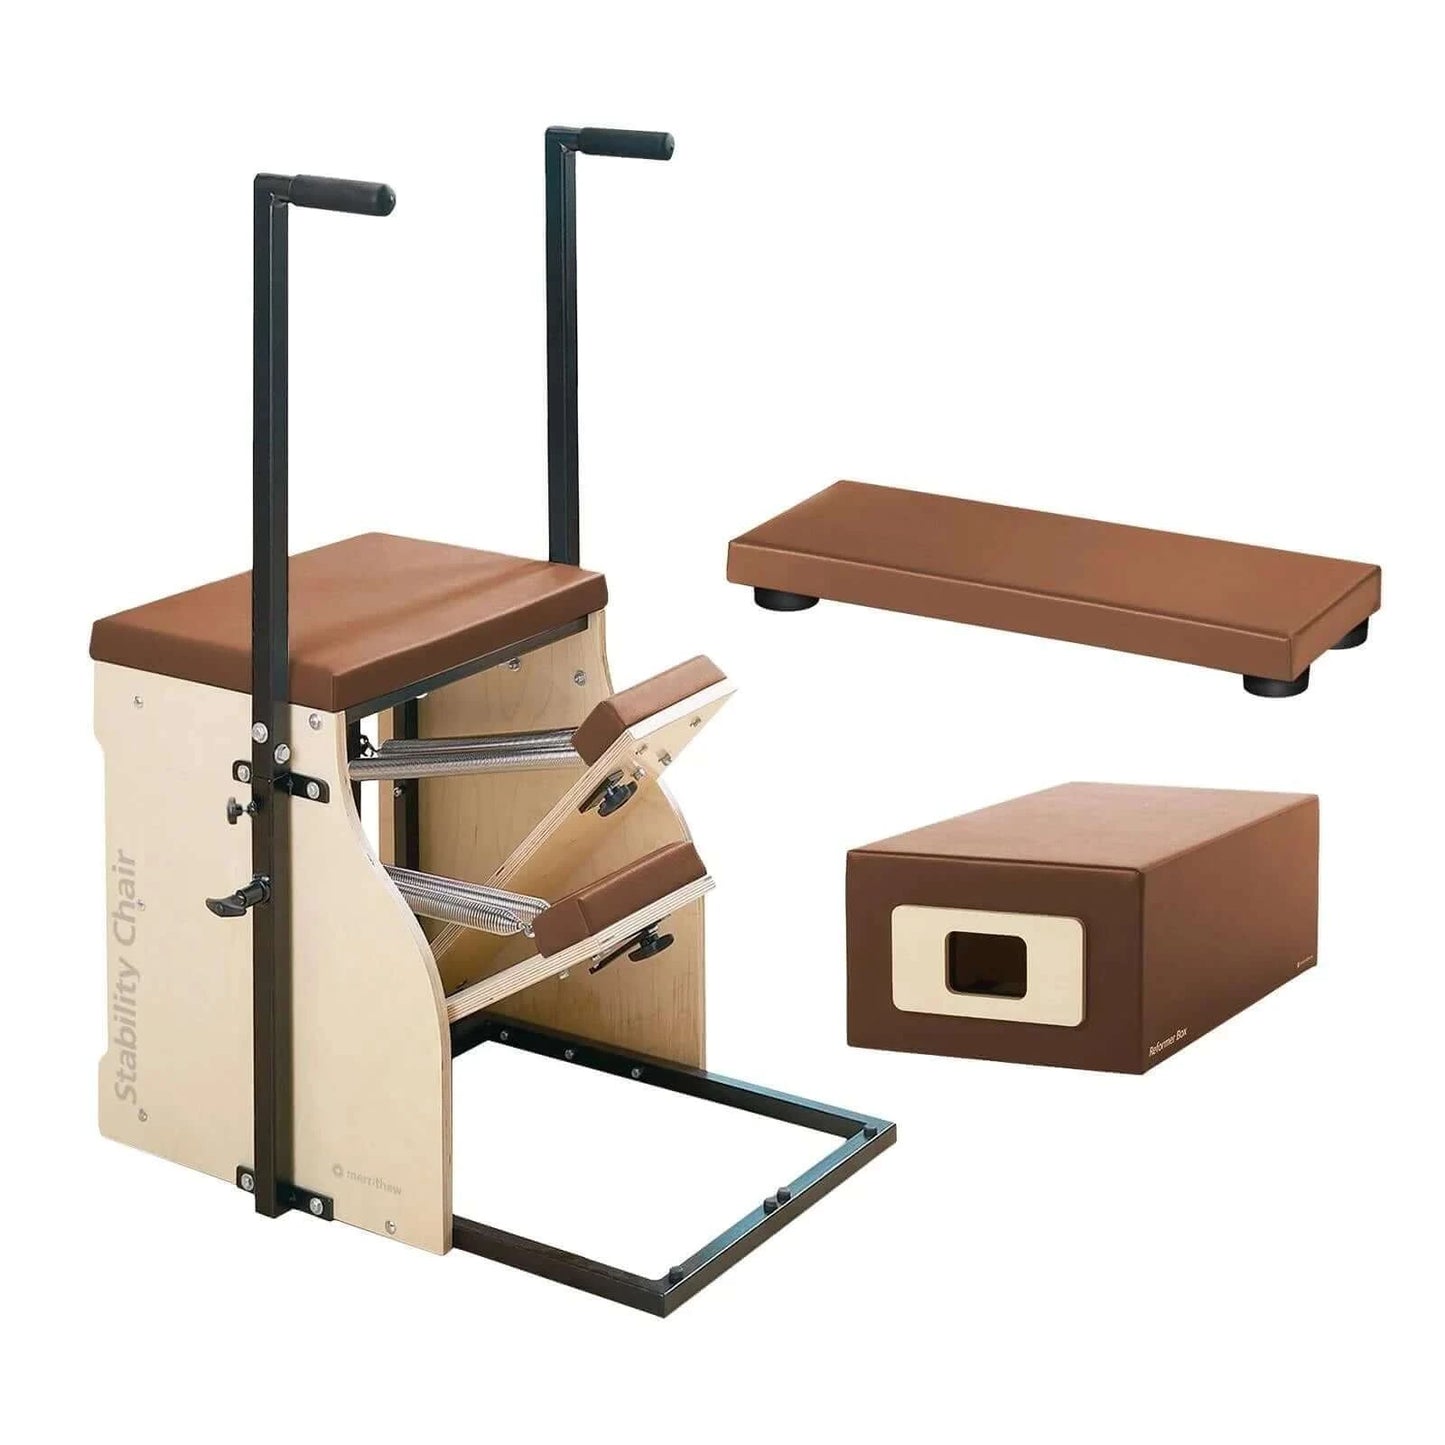 Siera Brick Merrithew™ Pilates Split-Pedal Stability Chair™ Bundle by Merrithew™ sold by Pilates Matters® by BSP LLC